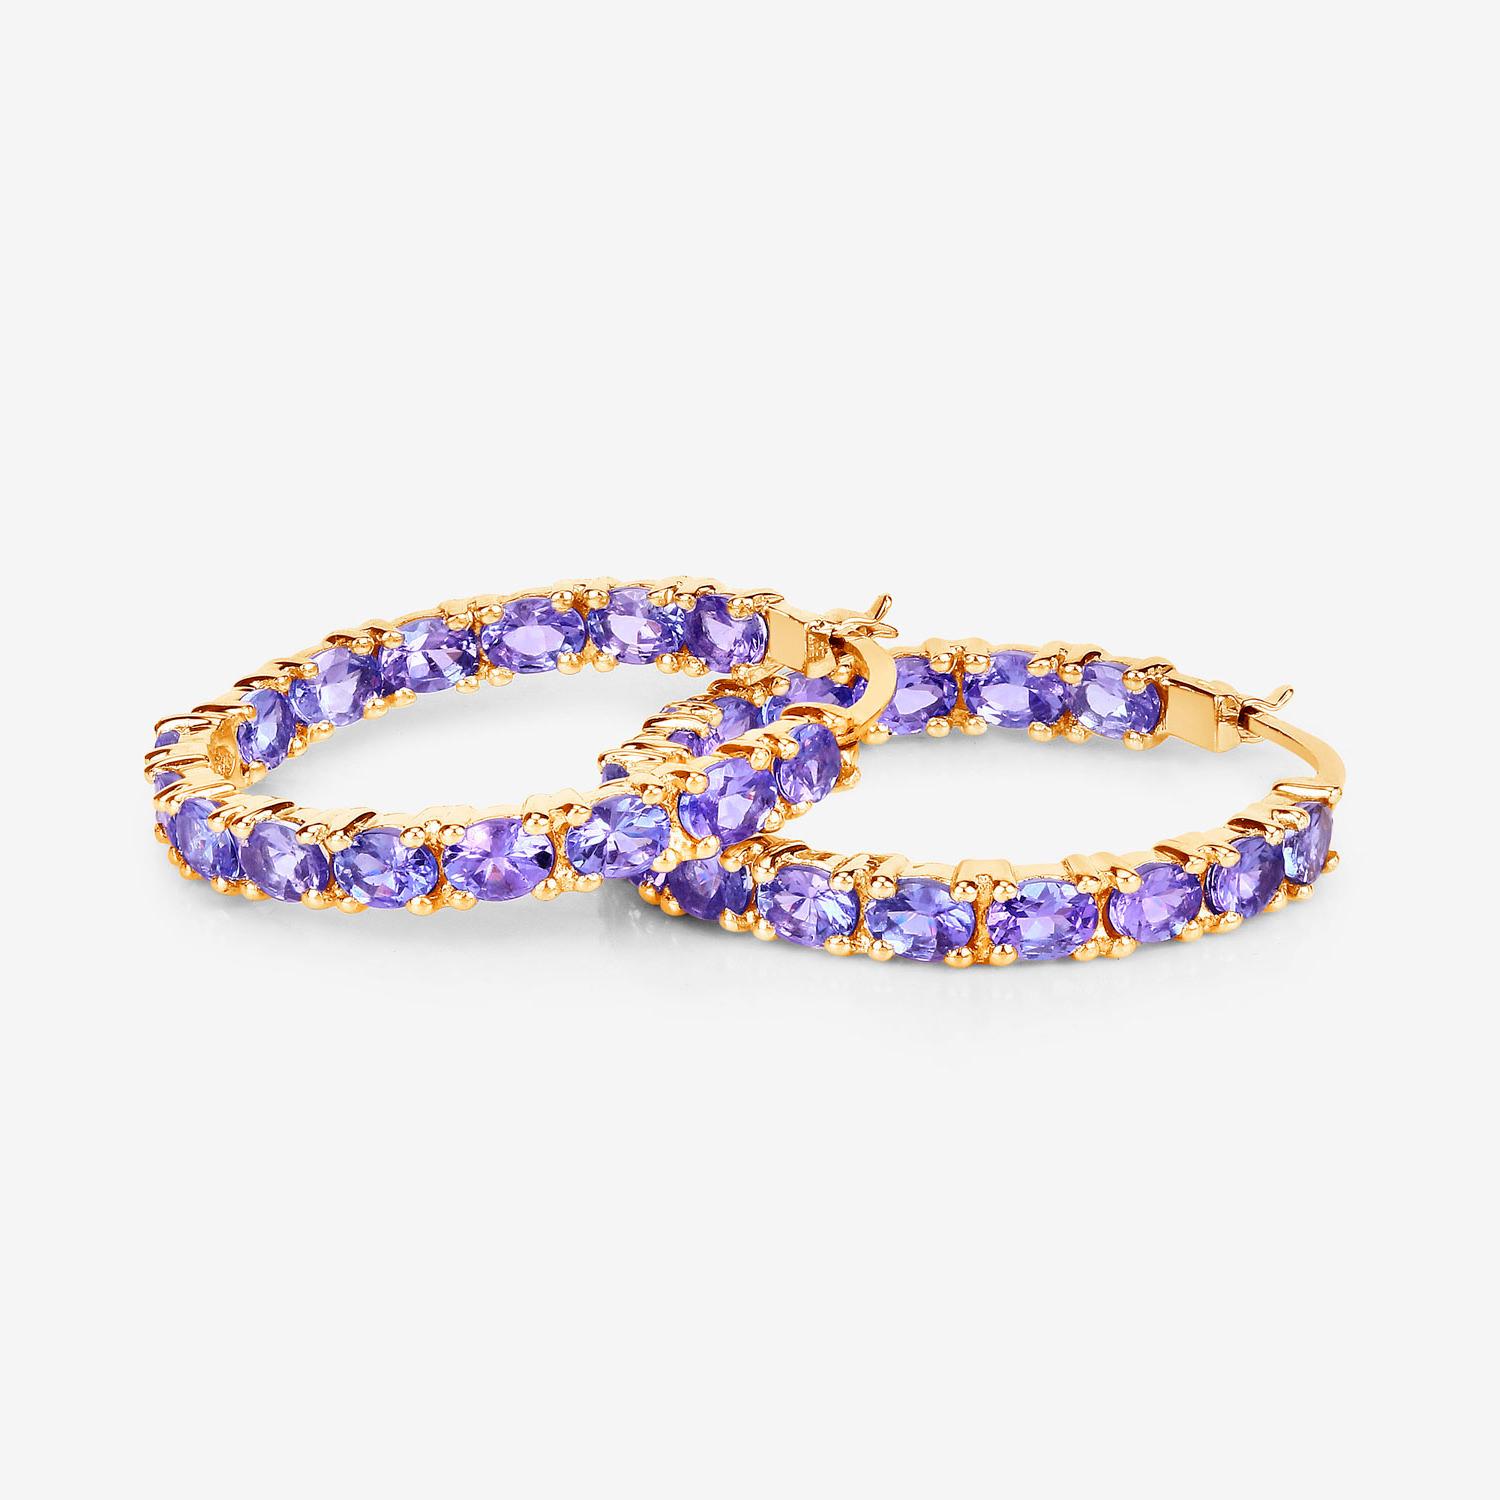 Tanzanite Hoop Earrings 5.15 Carats 14K Yellow Gold Plated In Excellent Condition For Sale In Laguna Niguel, CA